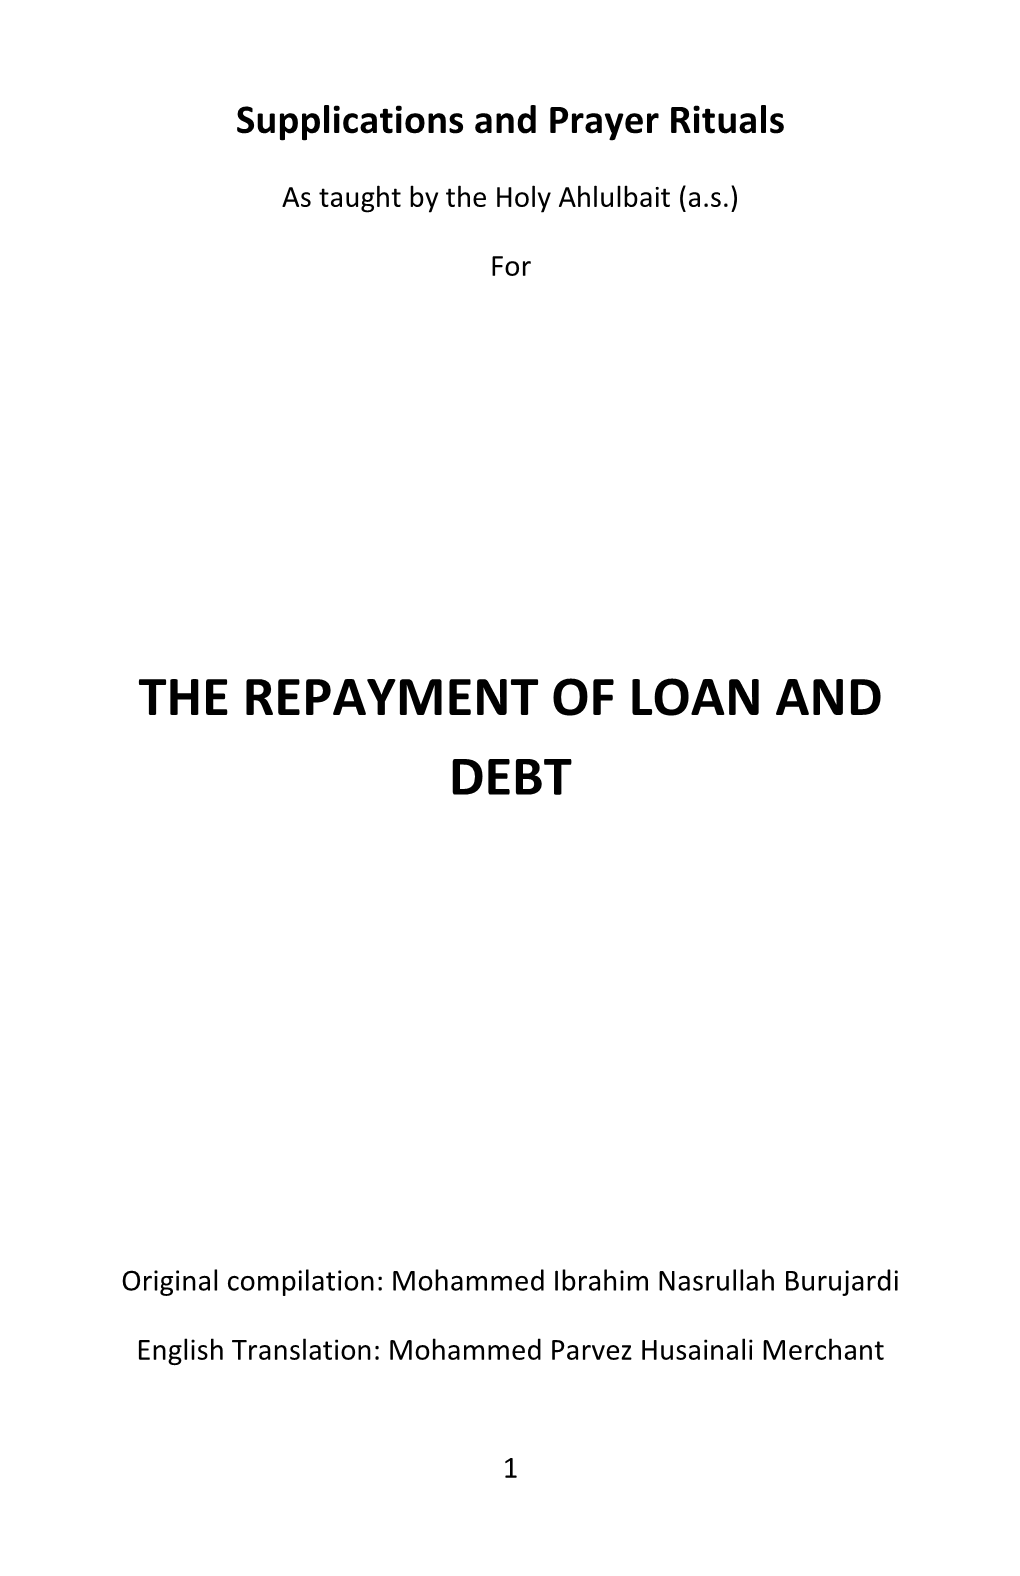 The Repayment of Loan and Debt